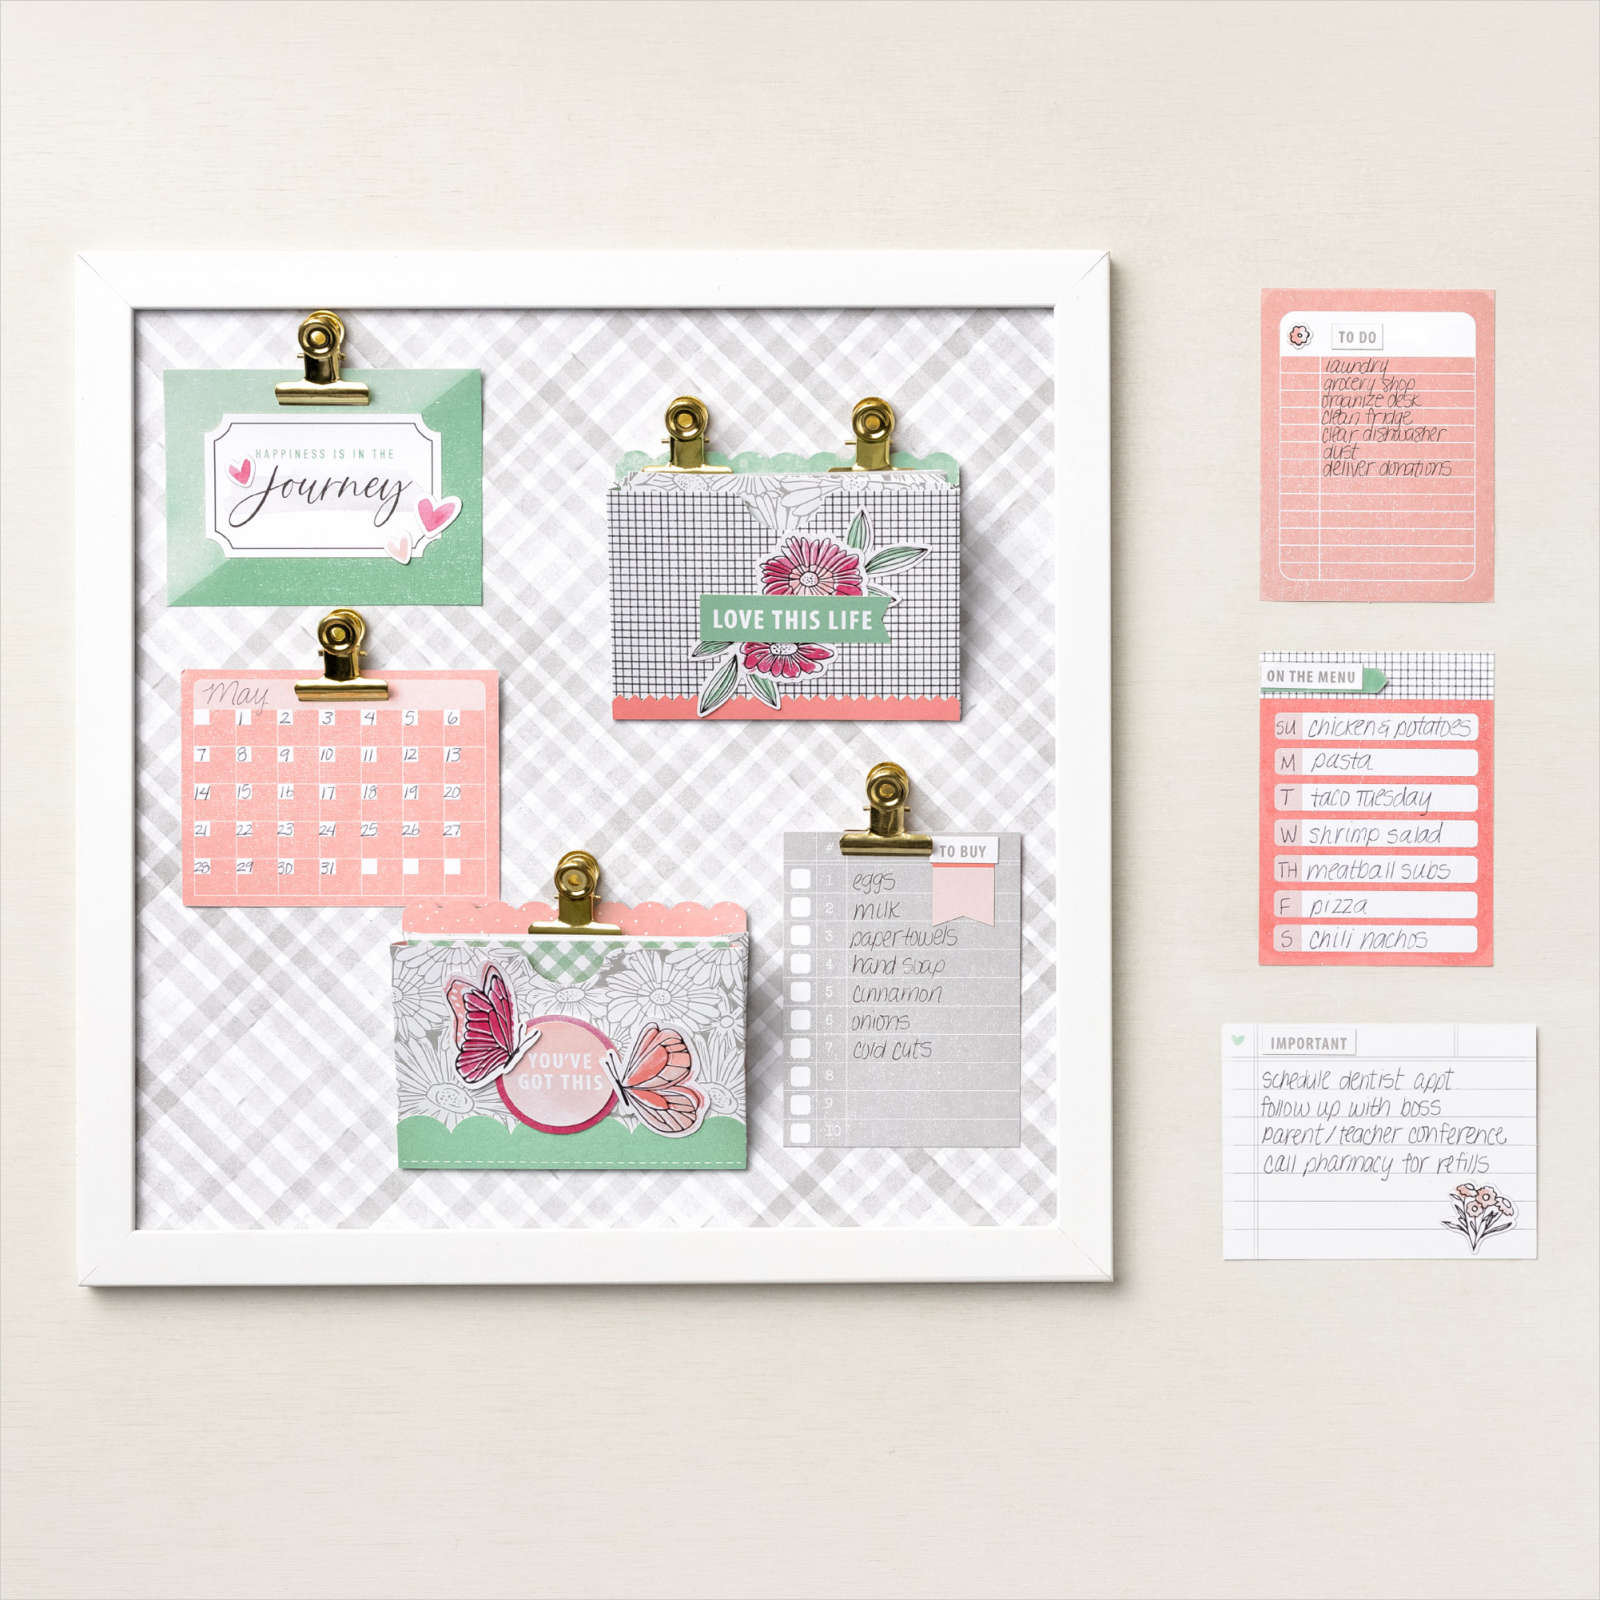 Get Organizing with Stampin’ Up!’s Newest Kit